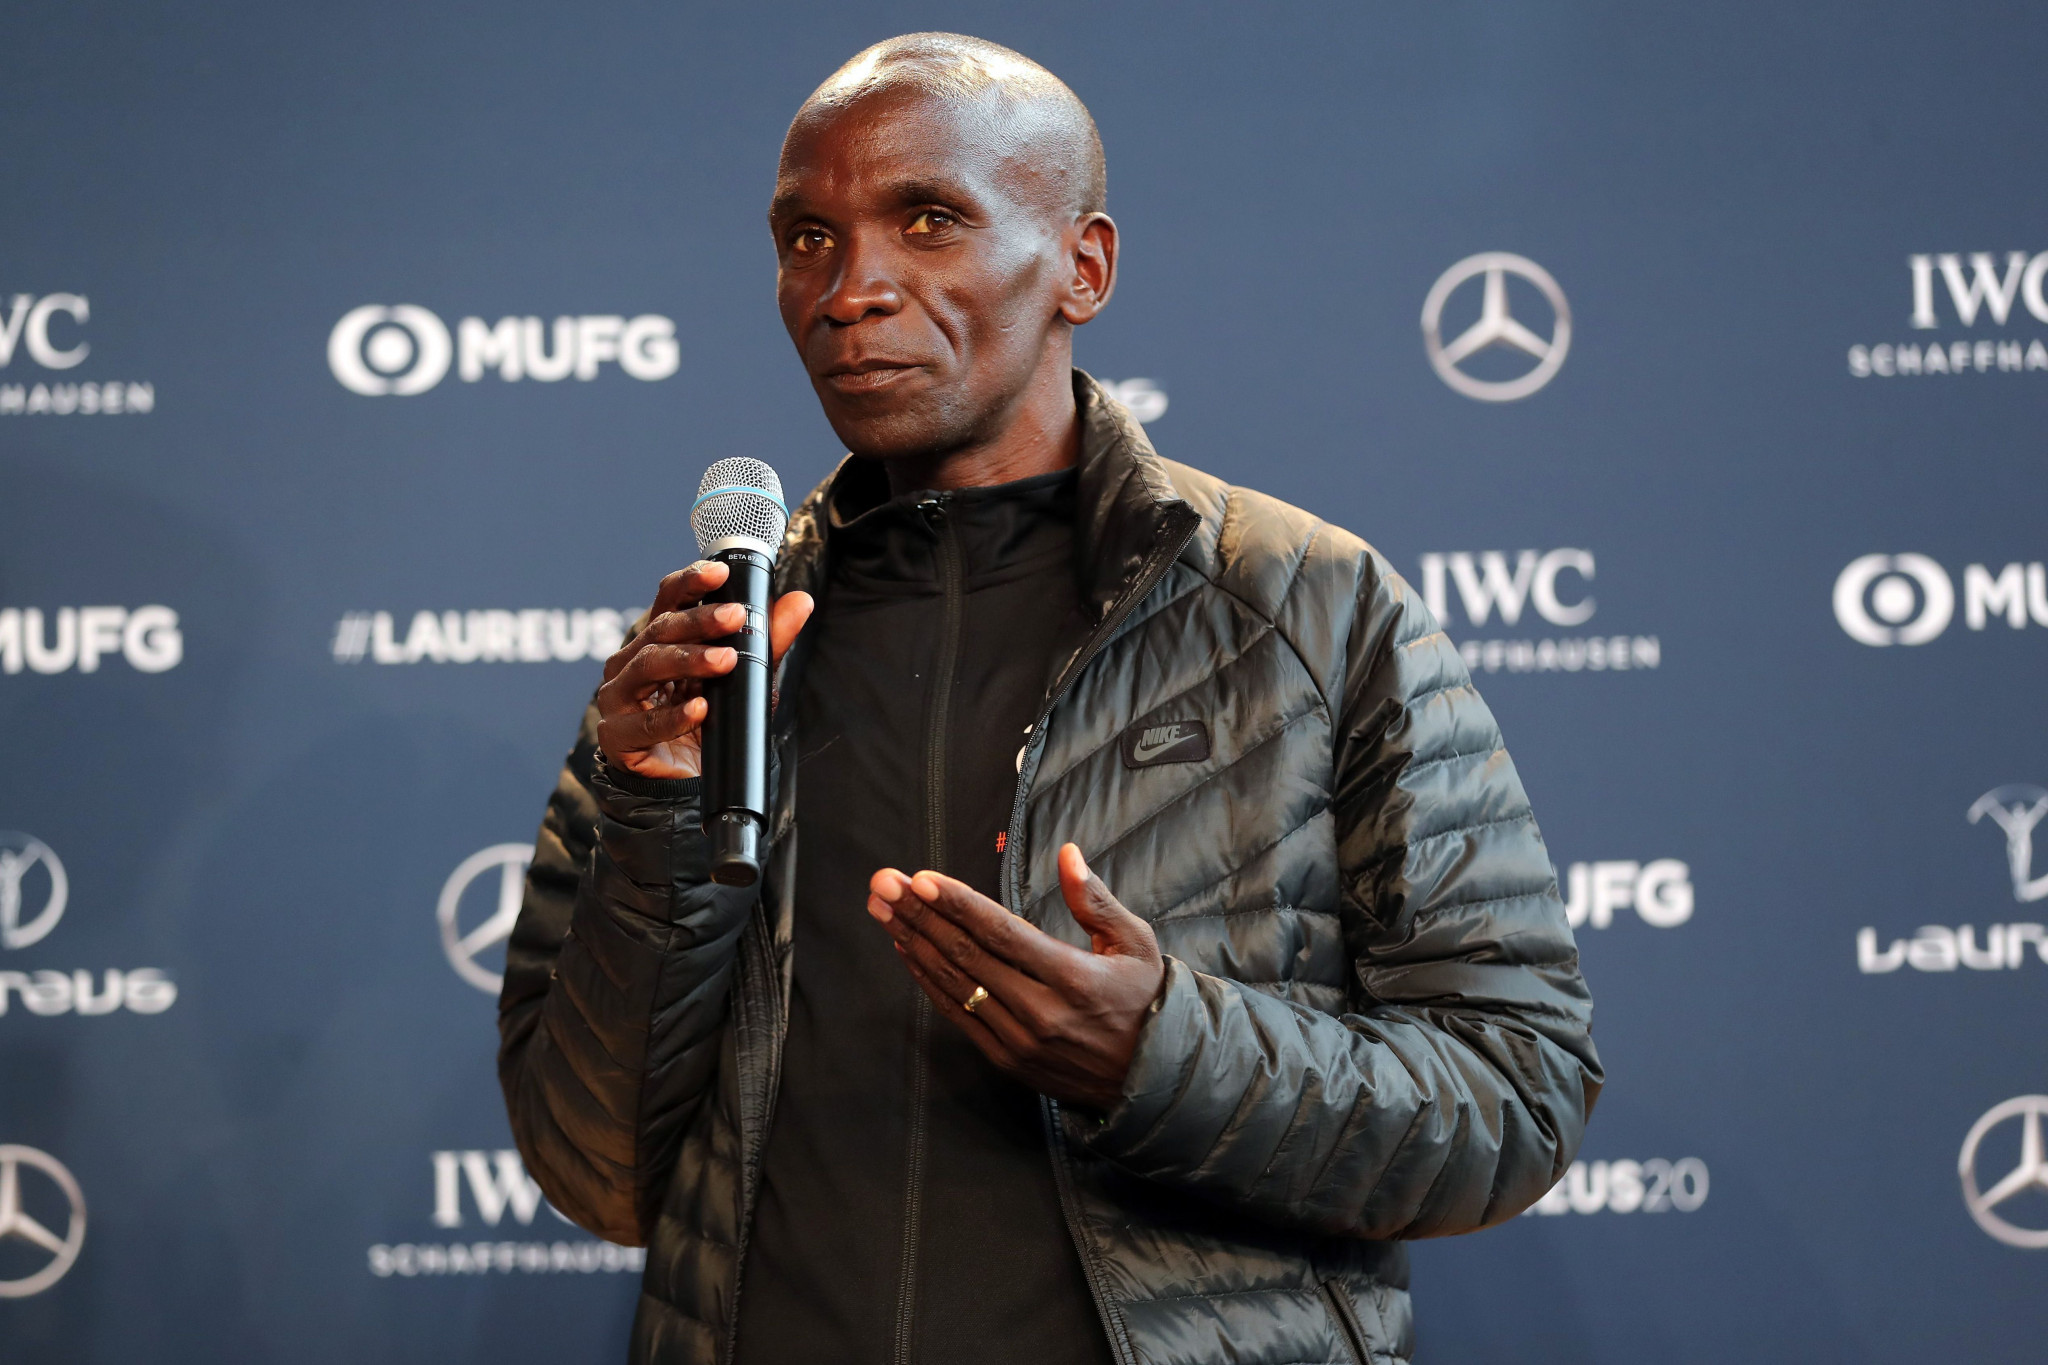 Eliud Kipchoge, who won gold in the men's marathon at Rio 2016, says he hopes to compete in the event at Tokyo 2020 ©Getty Images